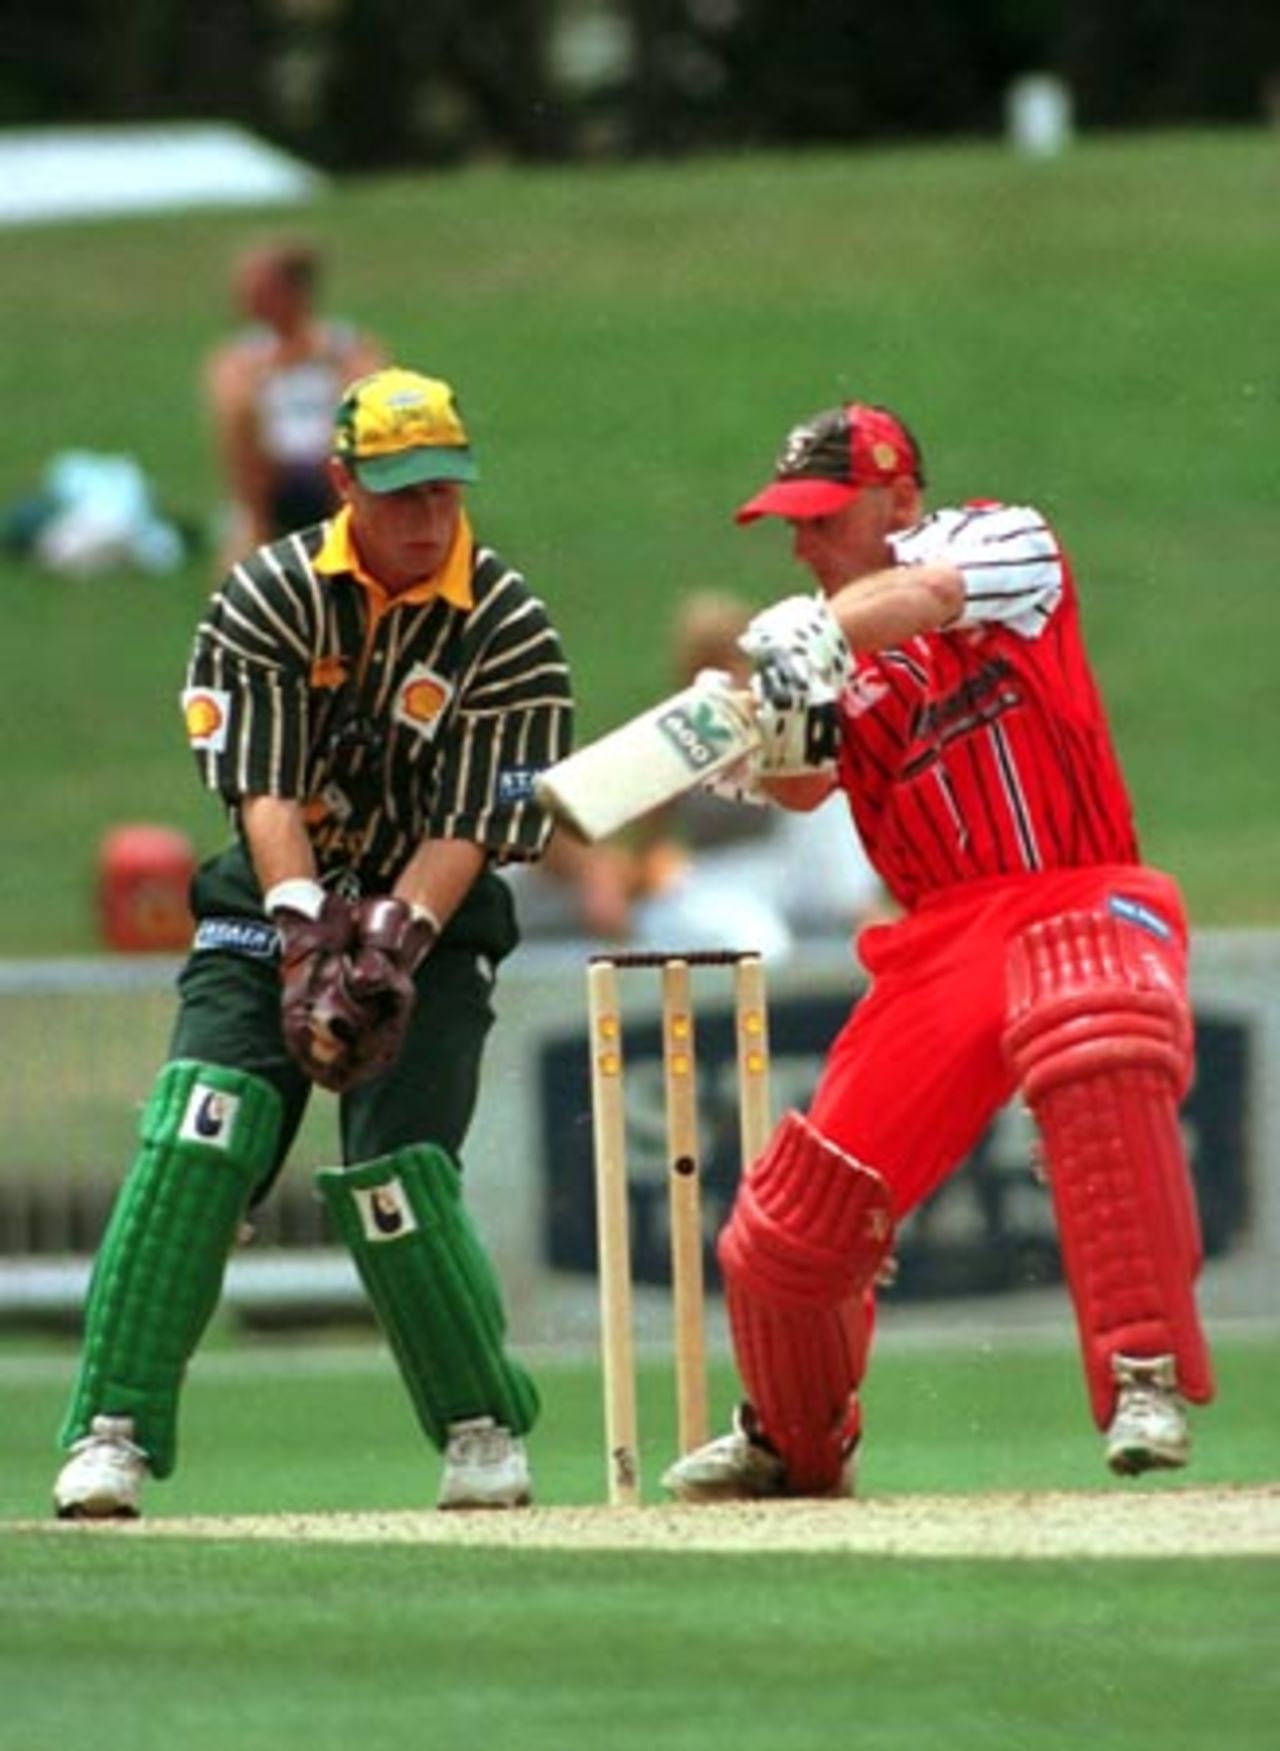 Canterbury wicket-keeper/batsman Gareth Hopkins forces off the back foot through point during his innings of 7 as Central Districts wicket-keeper Bevan Griggs looks on. 1st Shell Cup Final: Central Districts v Canterbury at McLean Park, Napier, 24 January 2001.